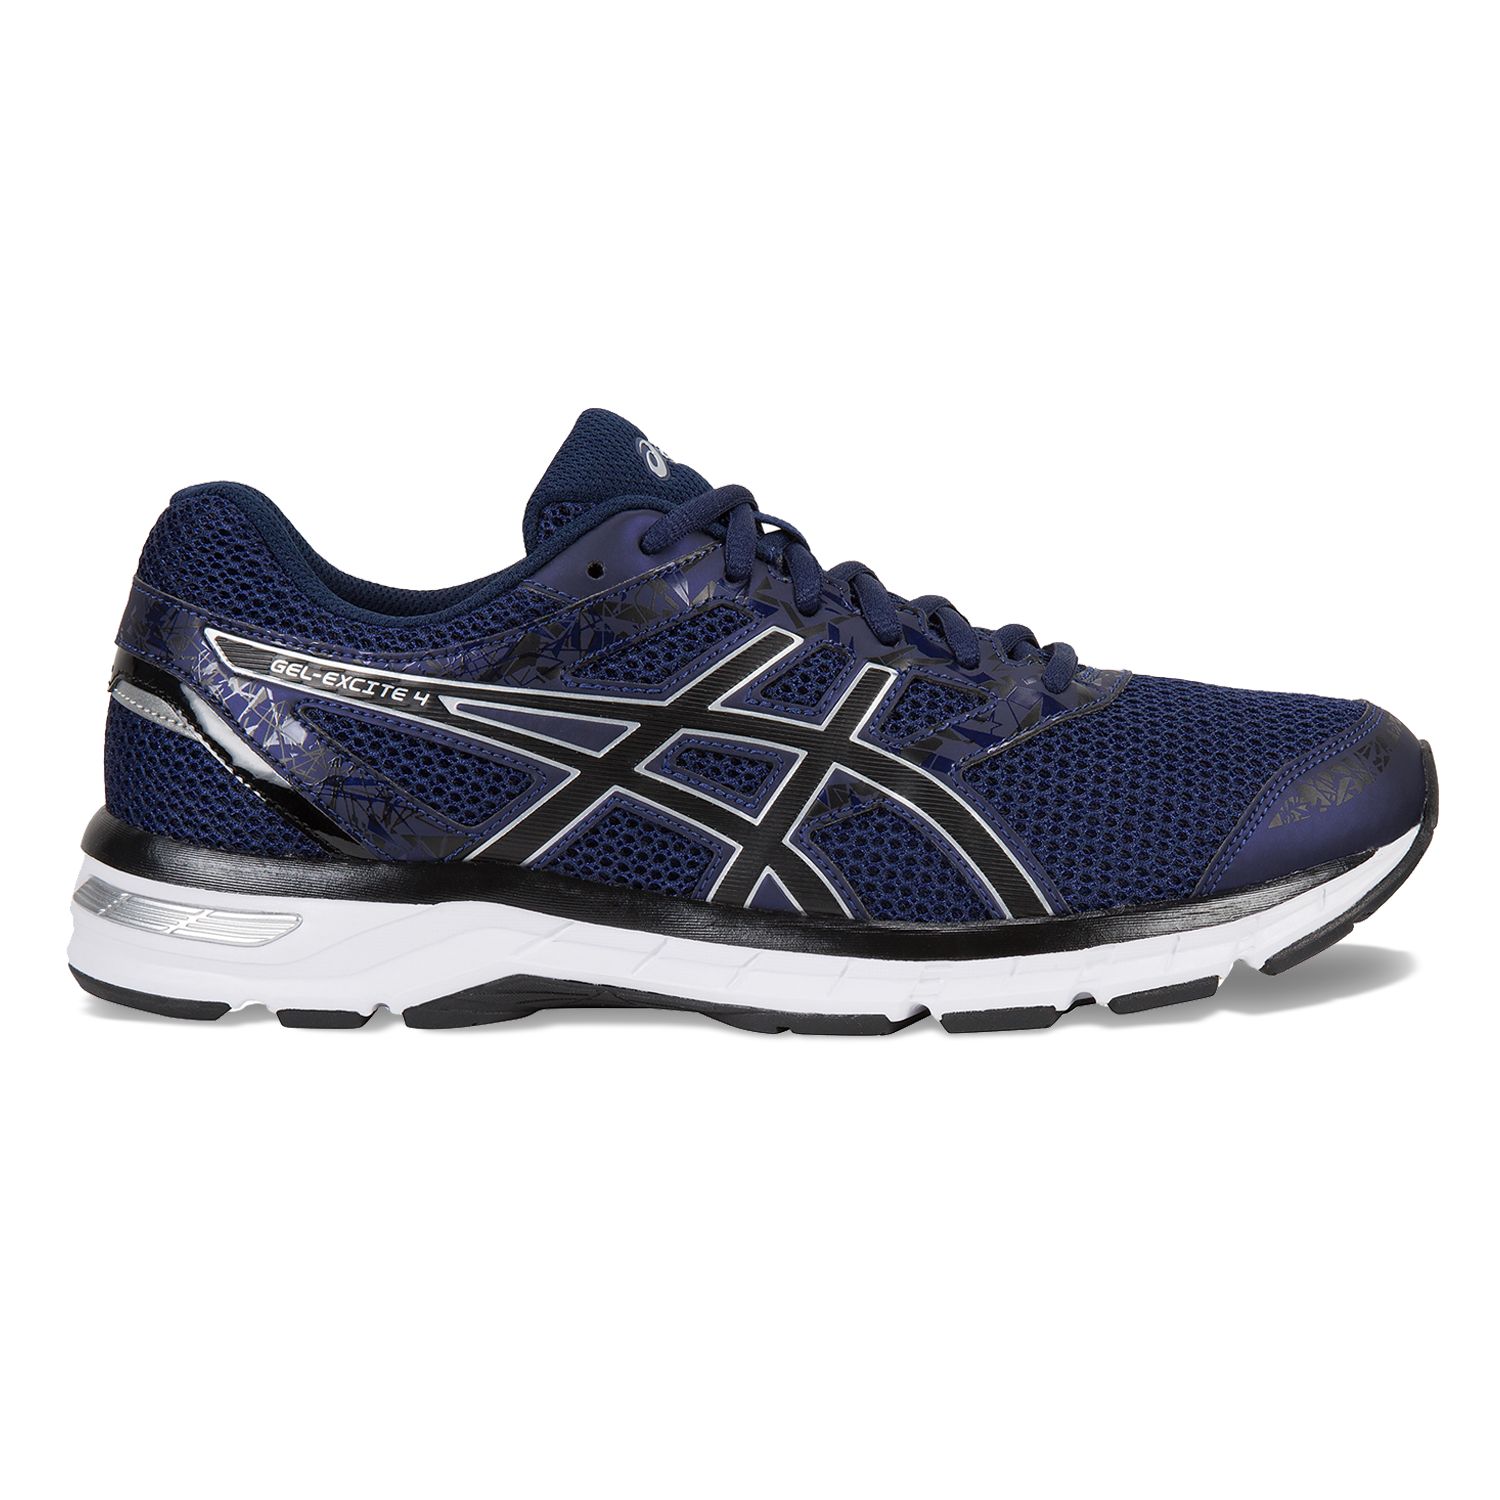 asics gel excite 4 running shoes